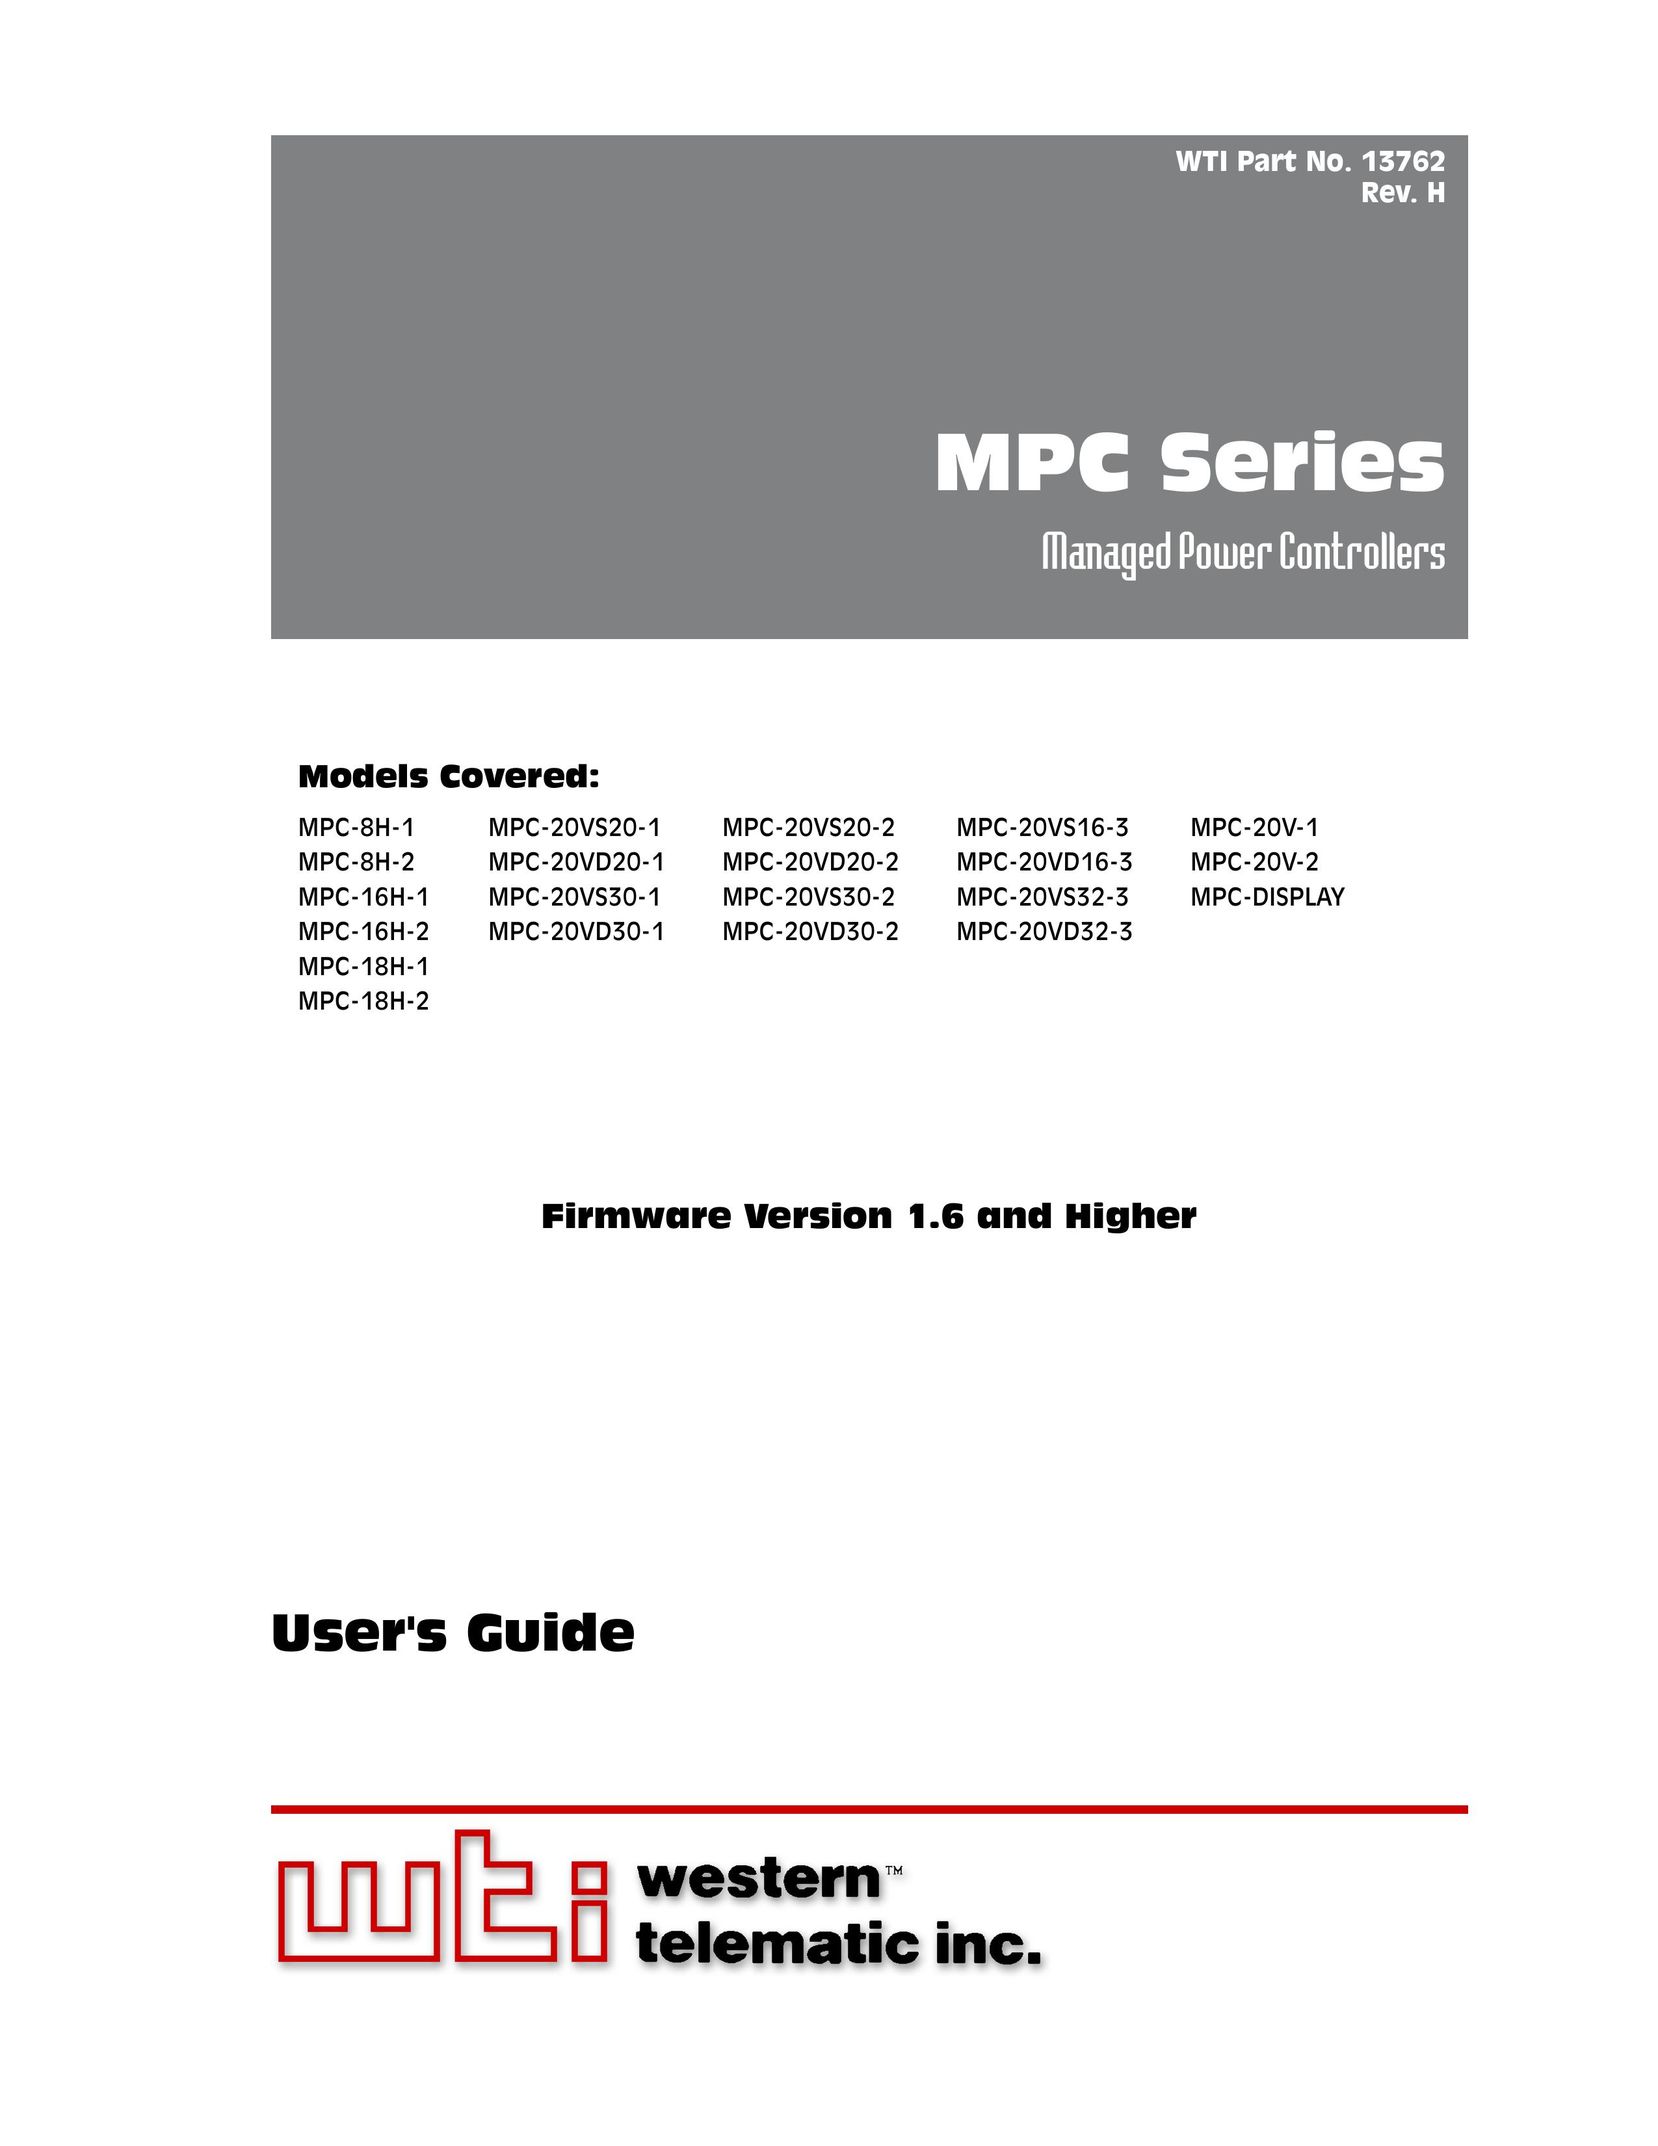 Western Telematic MPC-20VS16-3 Network Card User Manual